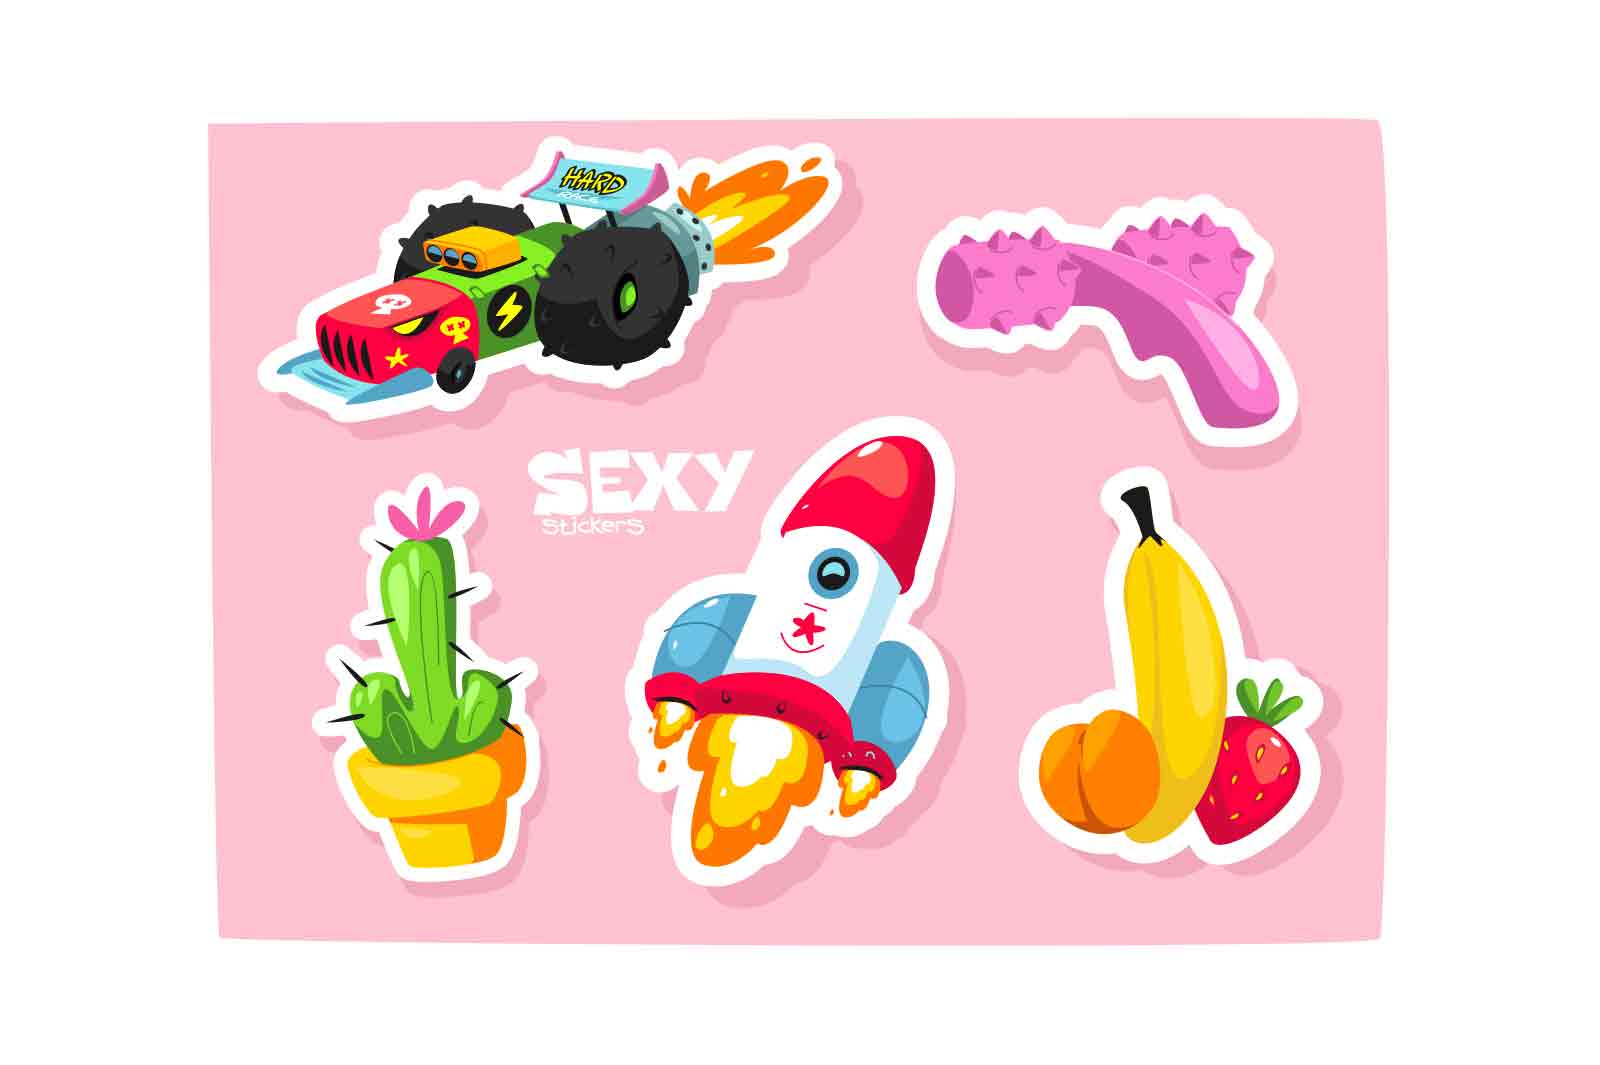 Set of stickers on erotic theme, vector icons, illustration. Sexy stickers.